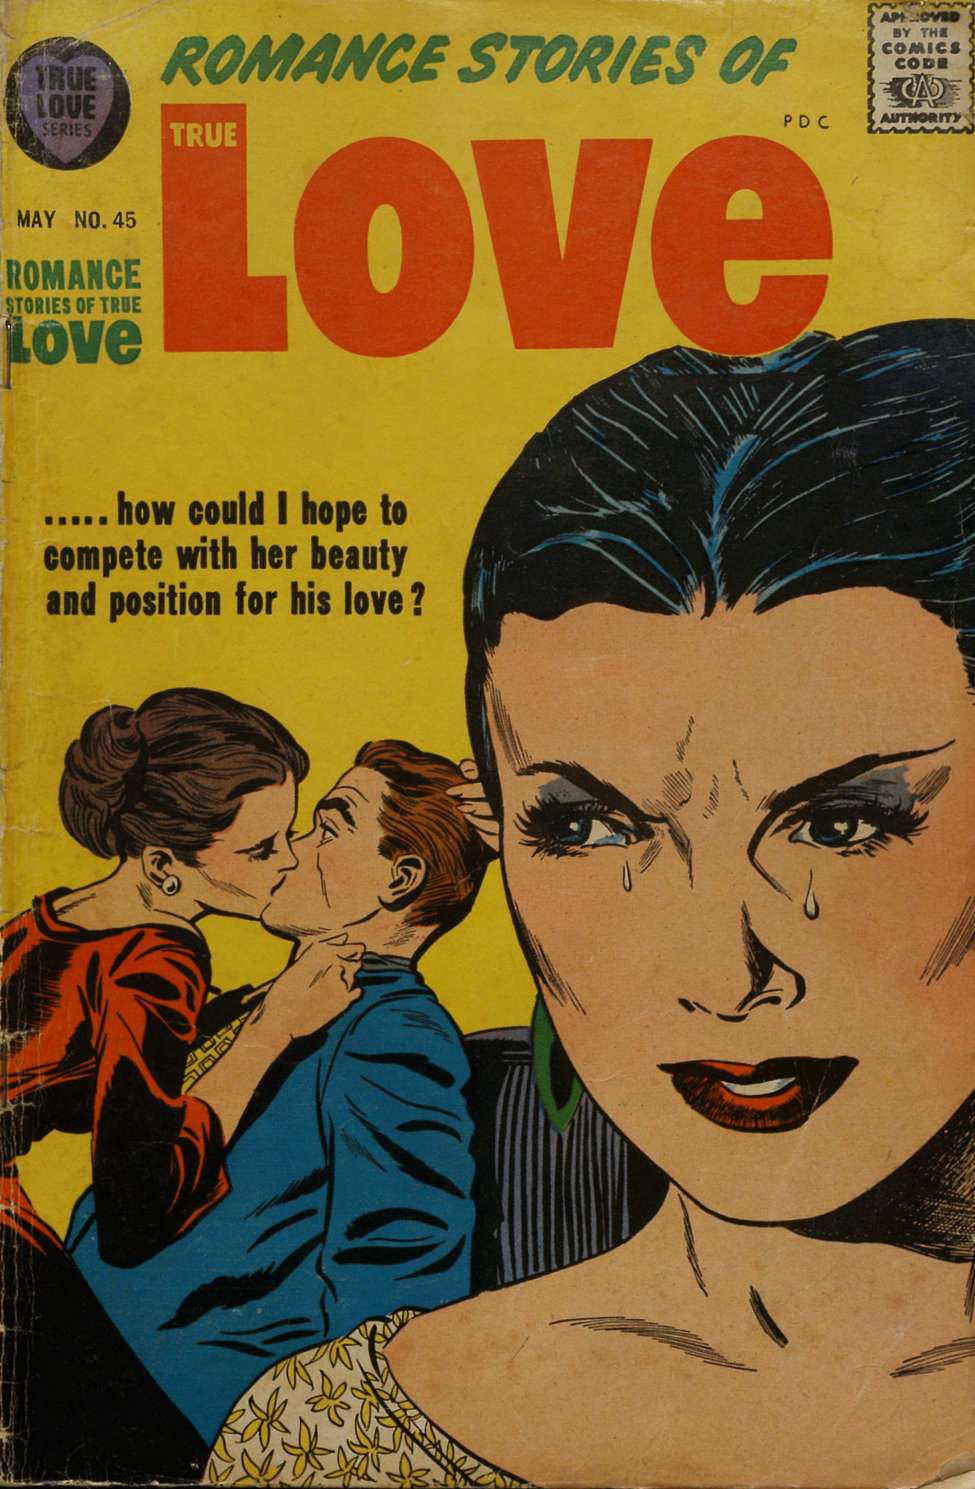 Comic Book Cover For Romance Stories of True Love 45 - Version 1